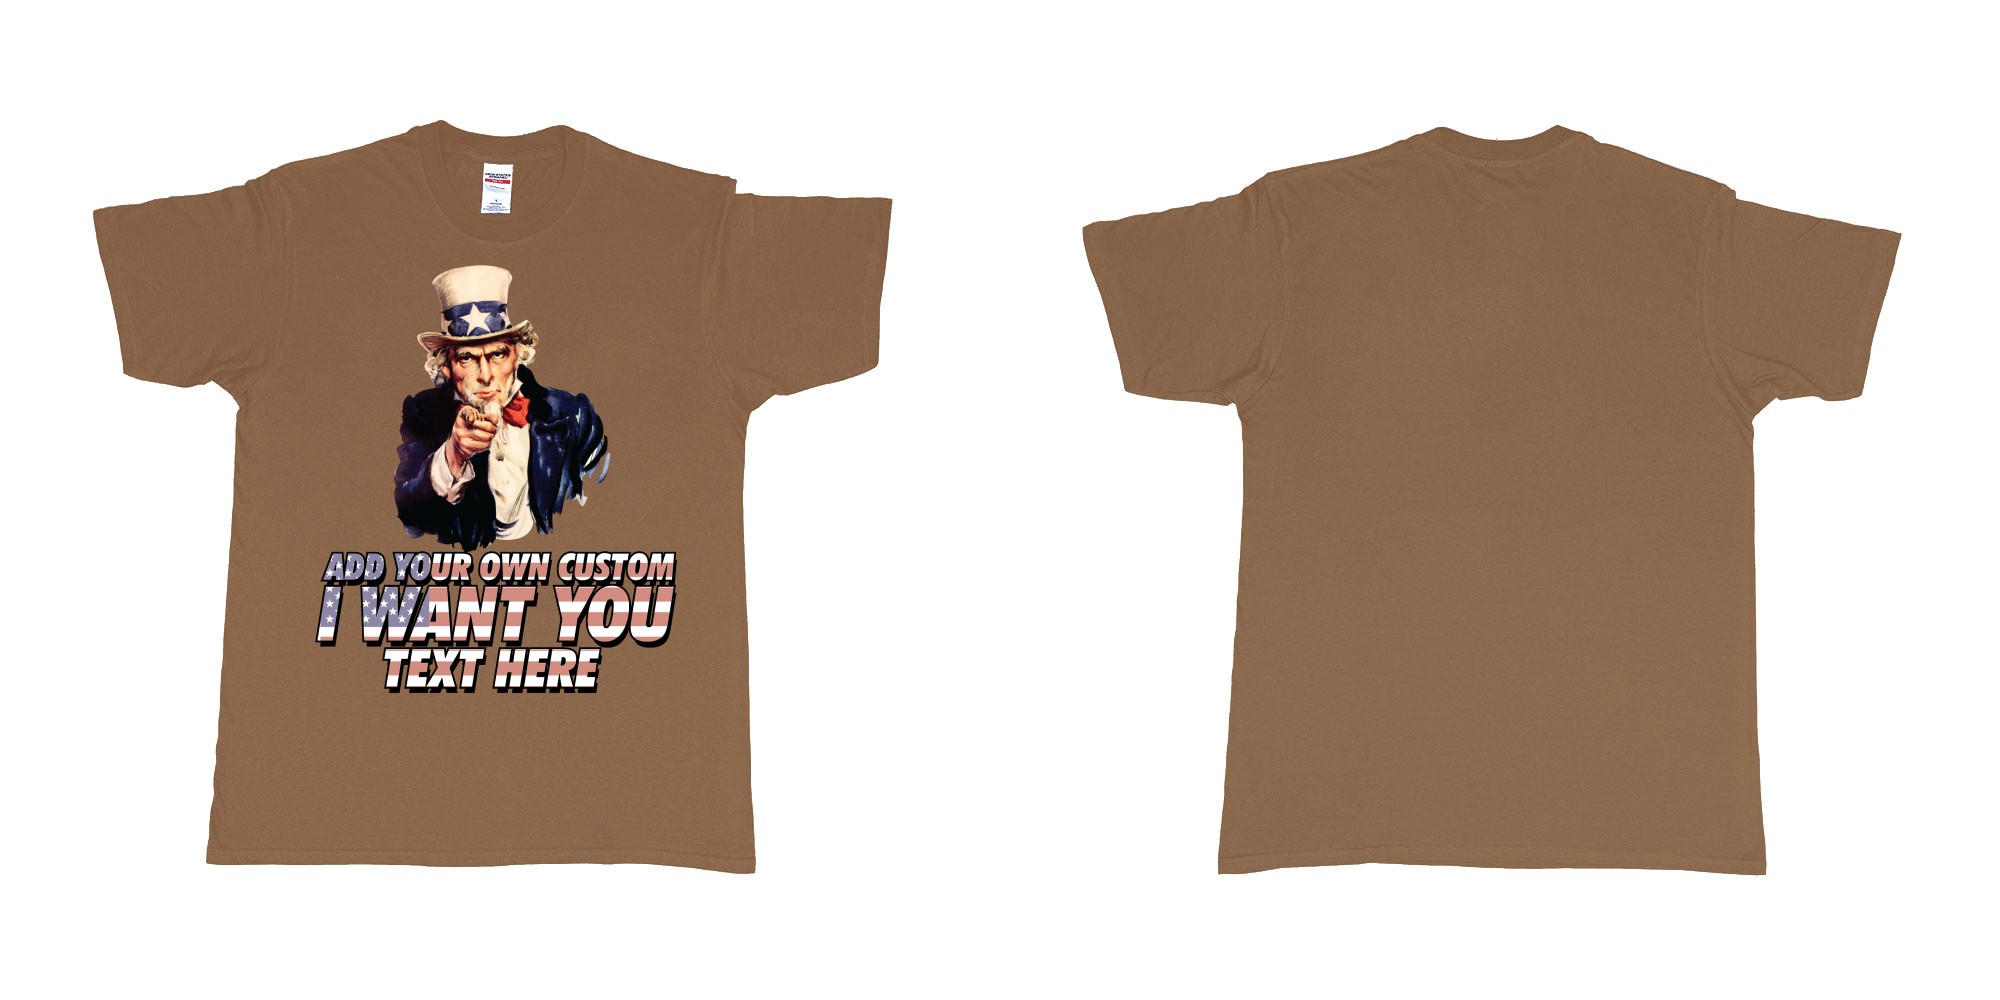 Custom tshirt design uncle sam i want you custom design own printing in fabric color chestnut choice your own text made in Bali by The Pirate Way